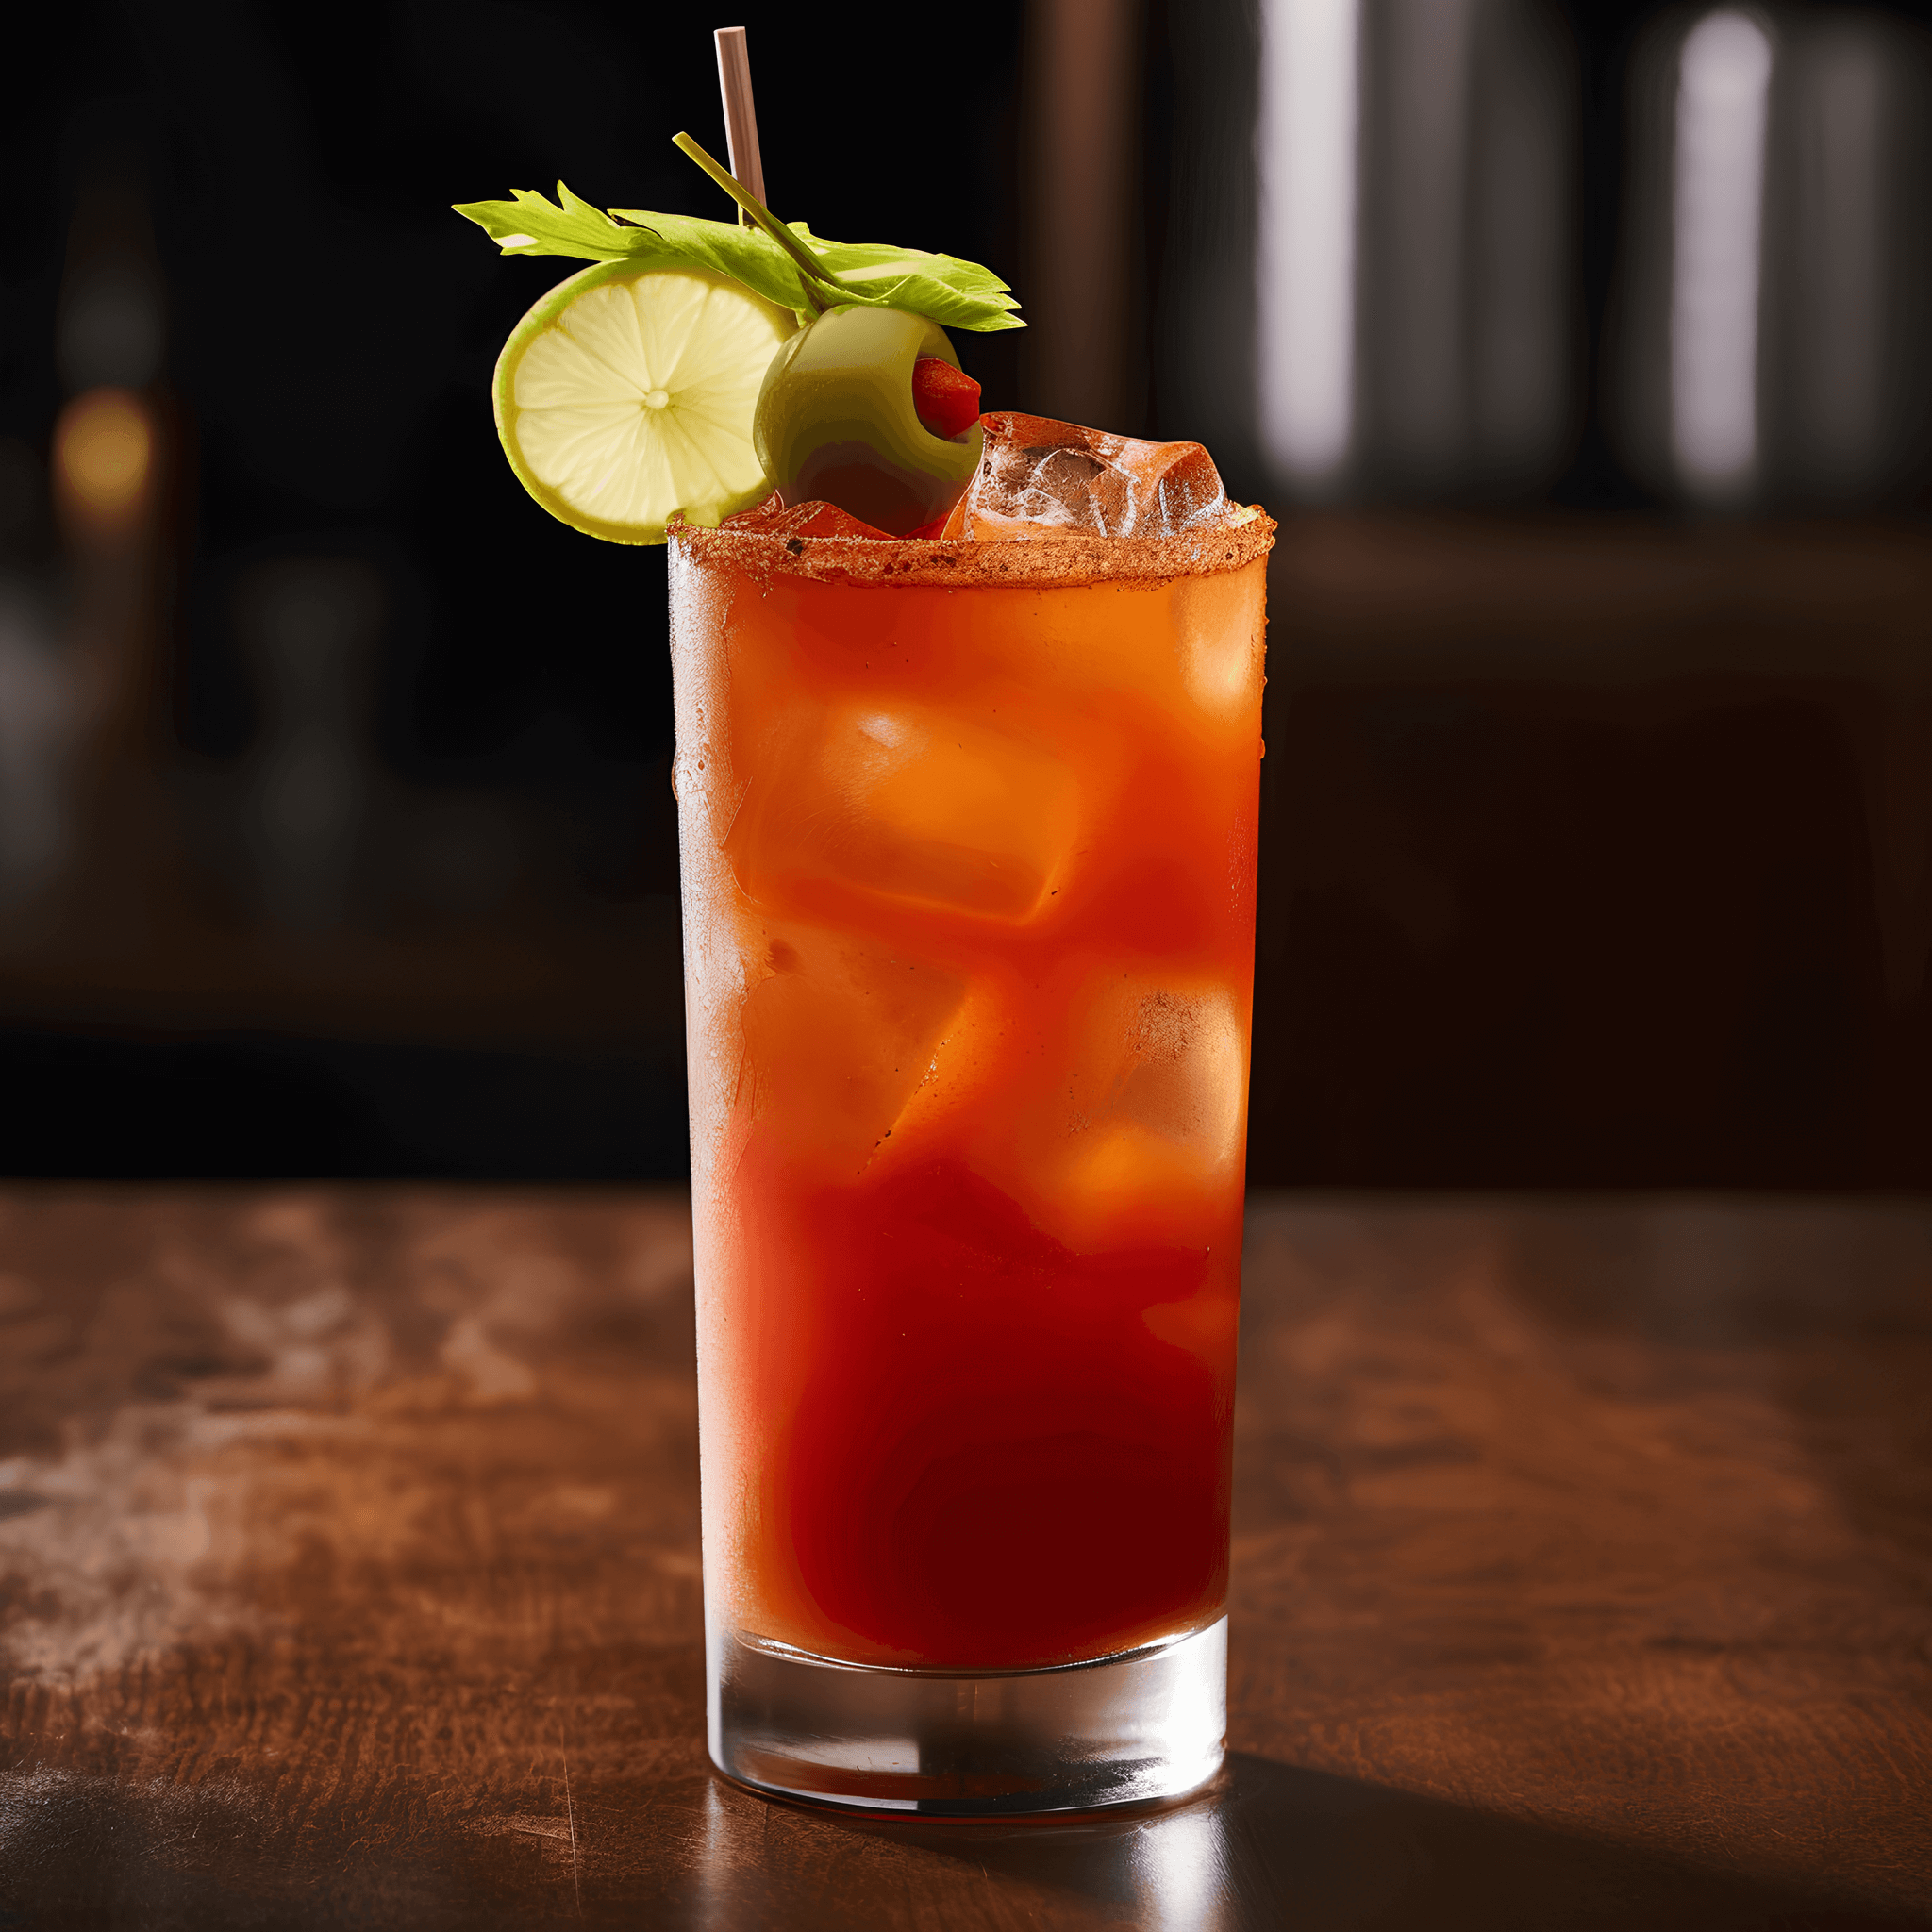 The Bloody Mary is a savory, spicy, and tangy cocktail with a strong tomato flavor. The vodka adds a subtle kick, while the Worcestershire and hot sauce provide a complex depth of flavor. The lemon juice adds a touch of acidity, and the celery salt and black pepper give it a slight earthiness.